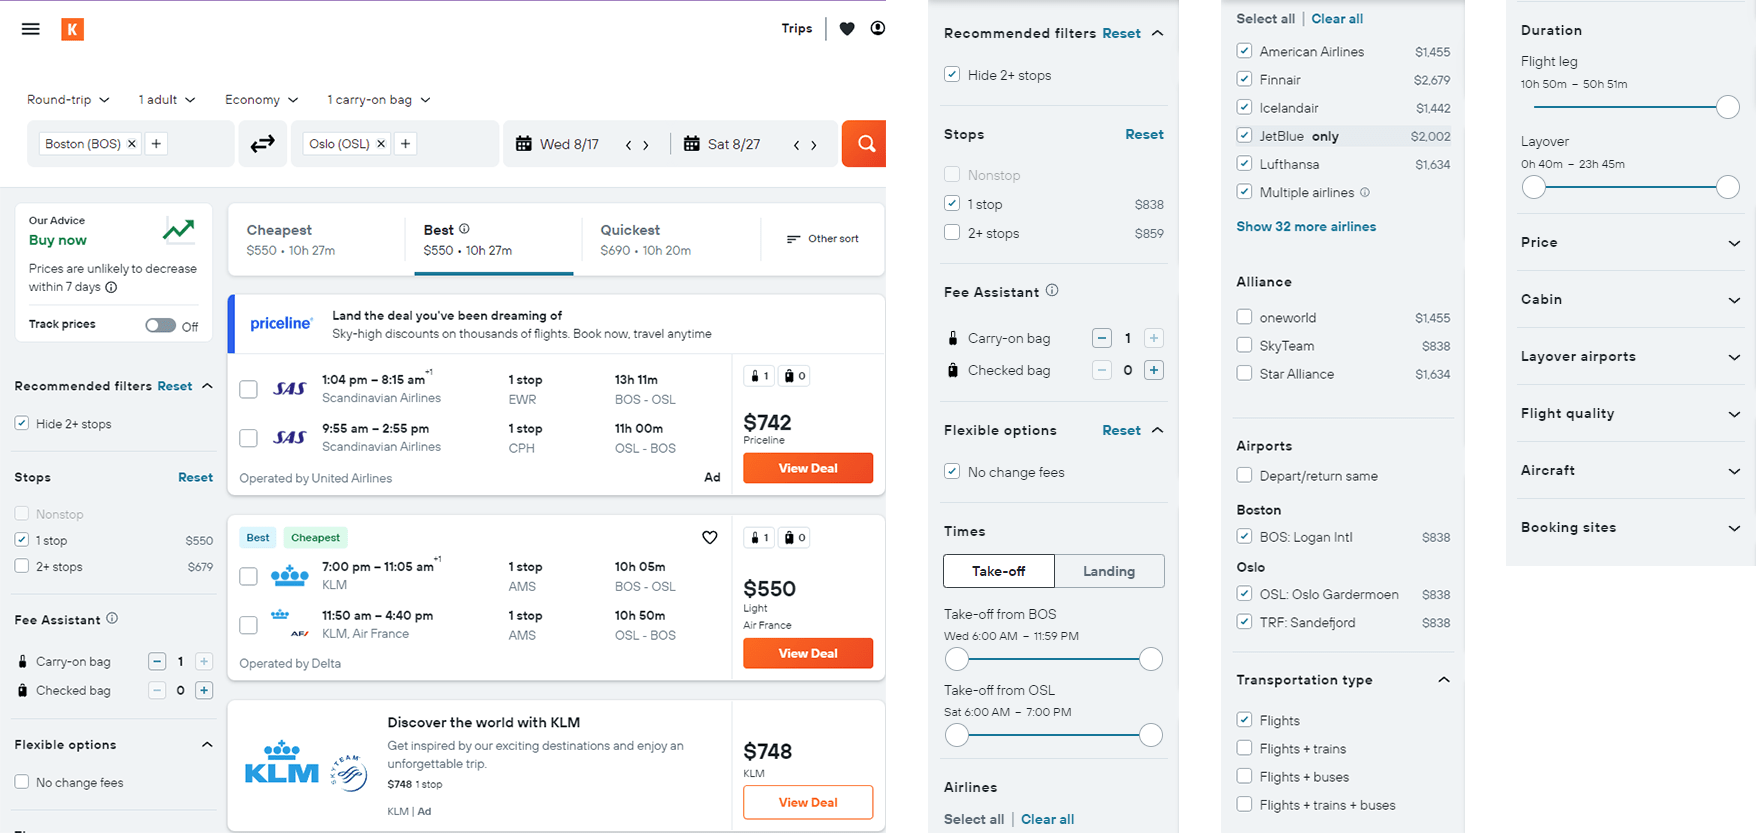 A screenshot of the travel website Kayak. On the left are flight options based on destination and travel dates. On the right are three columns that show the options a traveler can input to change the flight options. Examples include whether the traveler plans to check any bags, what airlines they want to travel, and how many stops they wish to make.